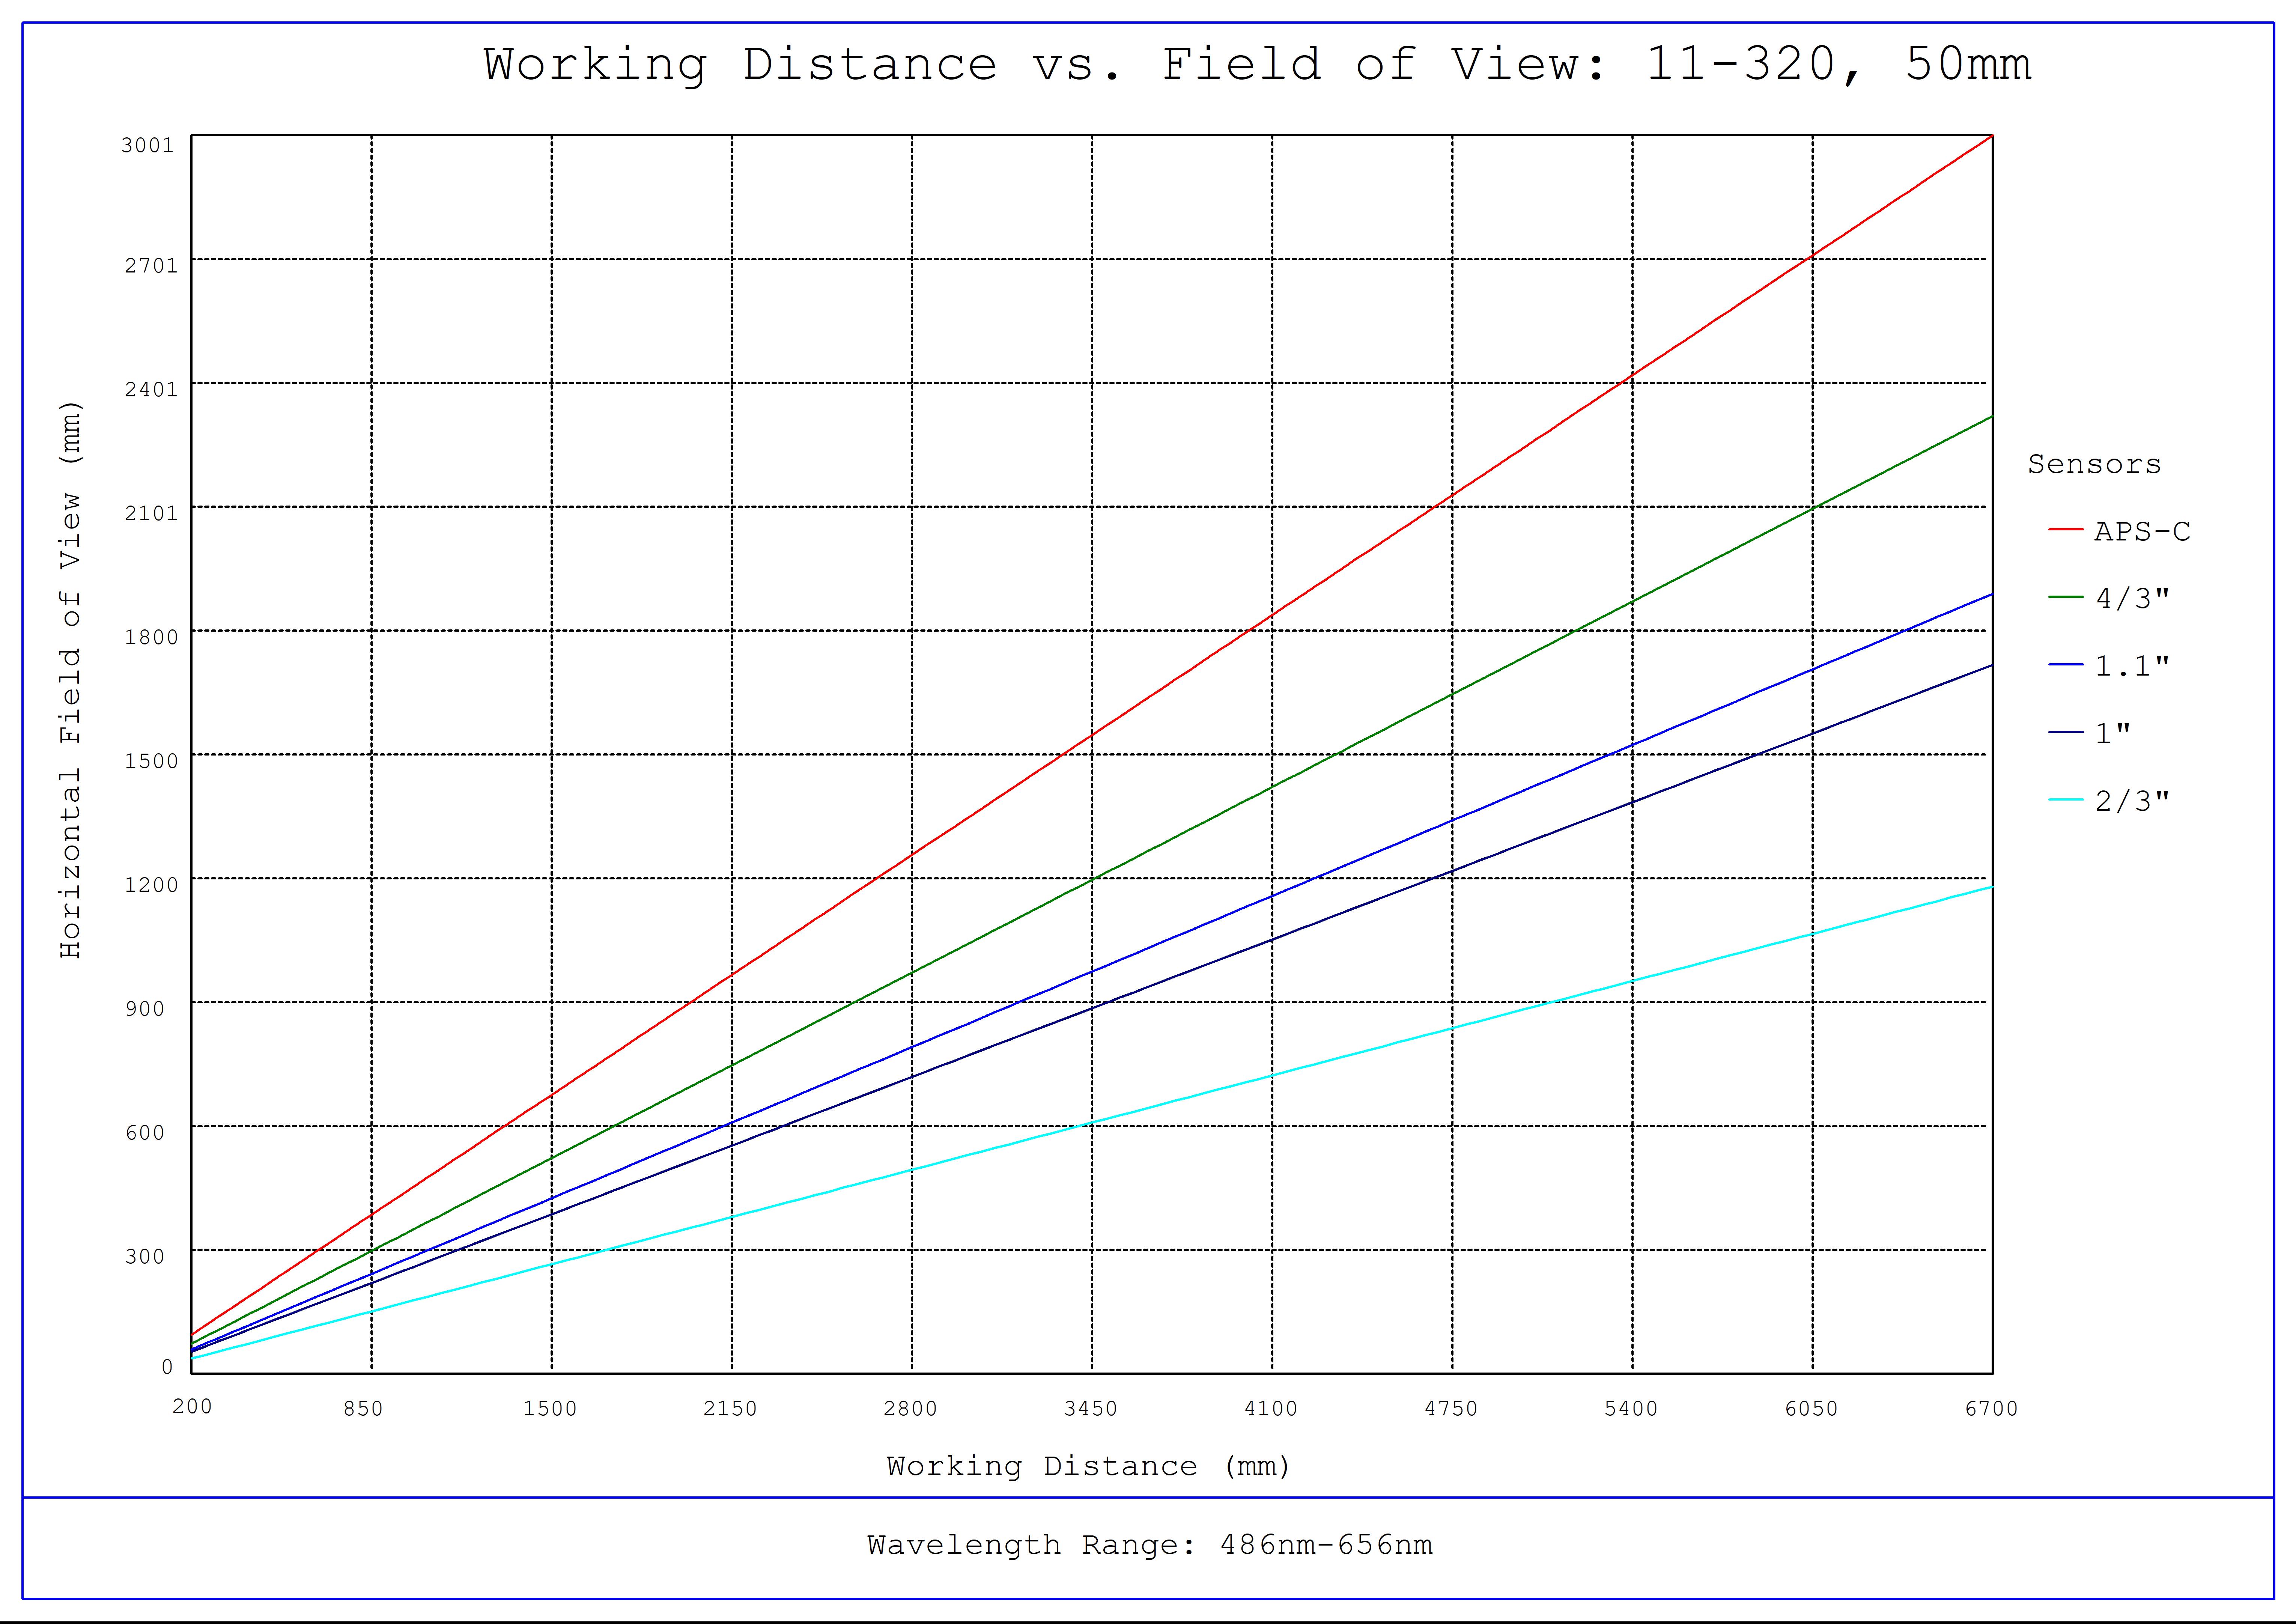 #11-320, 50mm CA Series Fixed Focal Length Lens, Working Distance versus Field of View Plot